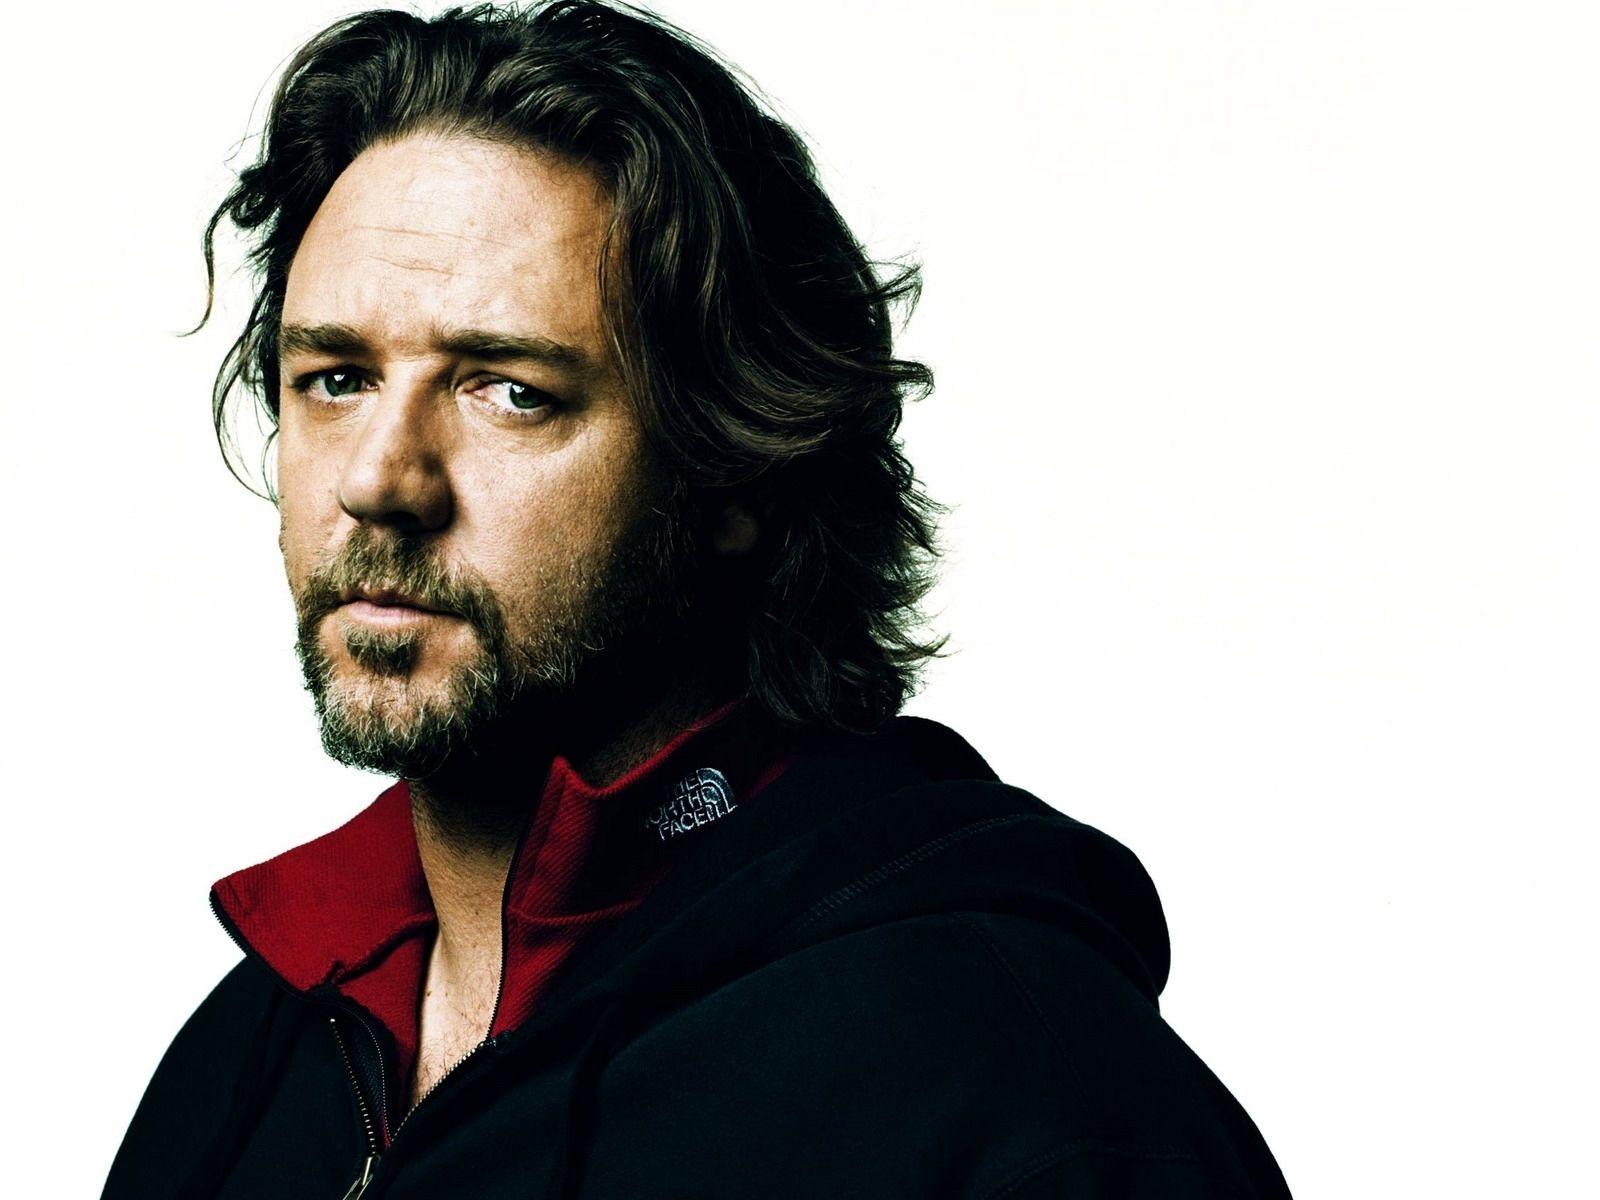 Russell Crowe 9815 1600x1200 px